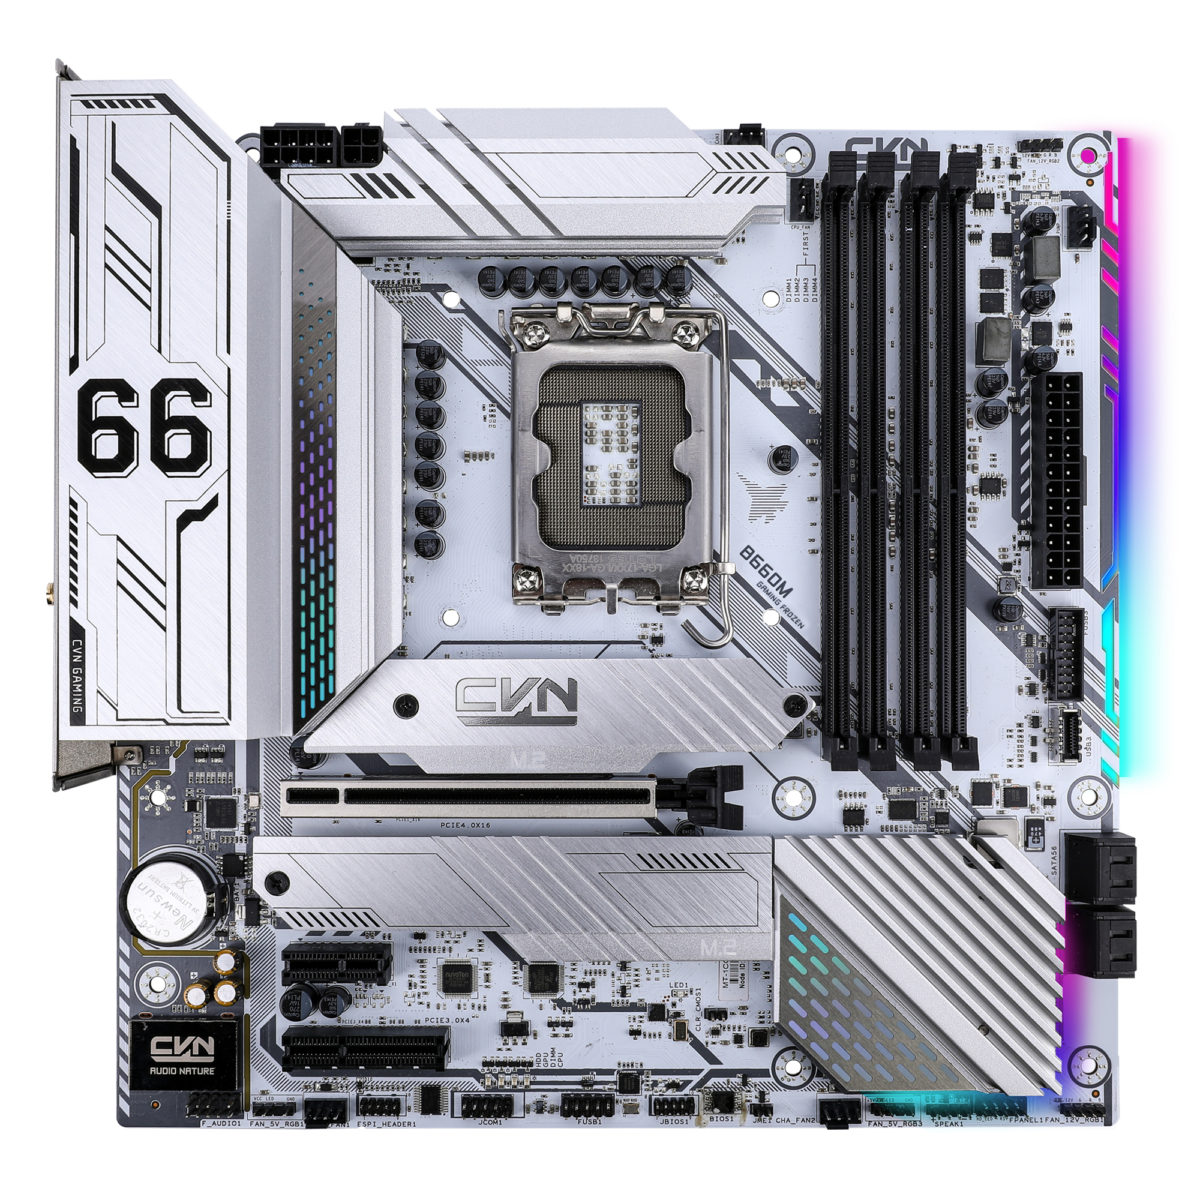 Colorful B660 Micro-Atx Series Motherboards Announced